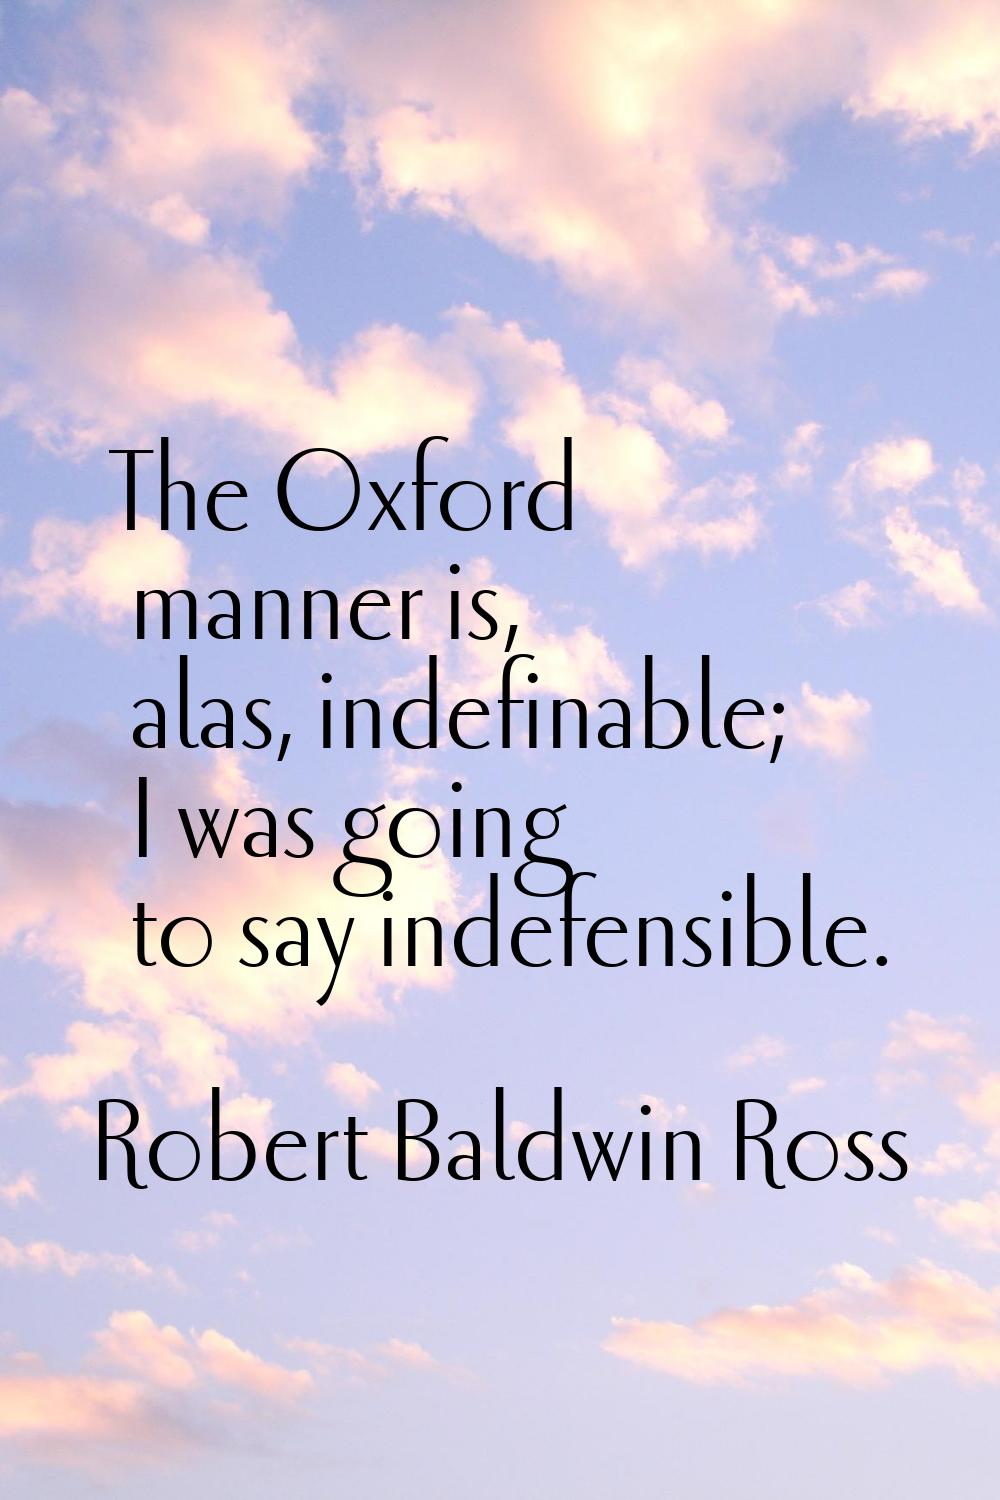 The Oxford manner is, alas, indefinable; I was going to say indefensible.